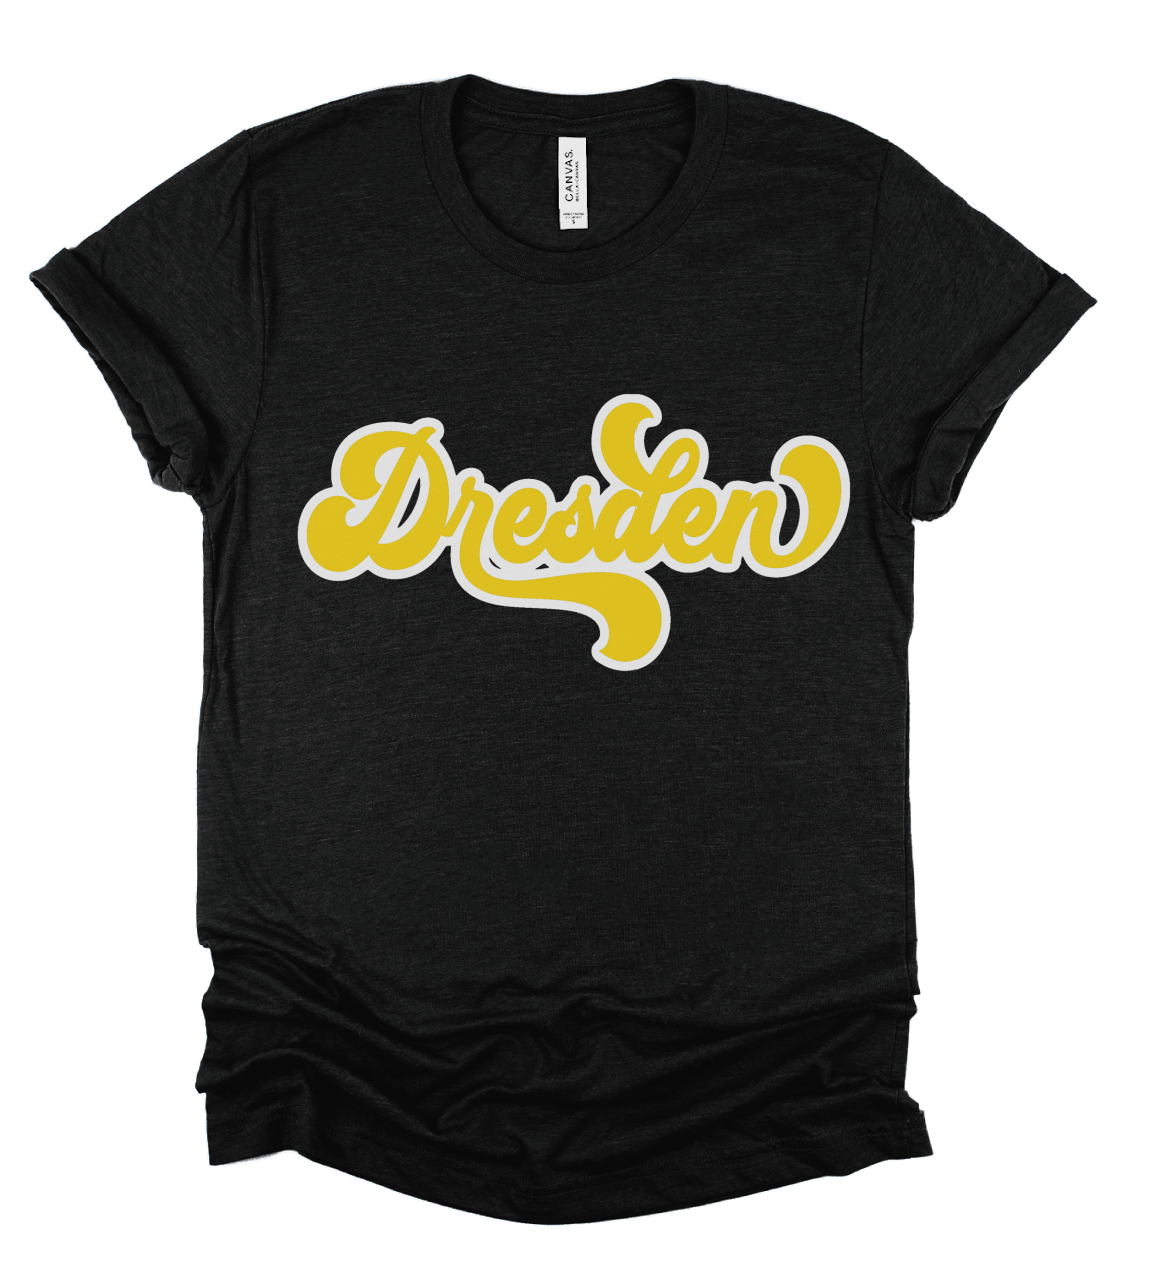 Dresden Lions Soft Style Spirit Tee / Toddler, Youth, and Adult Sizes